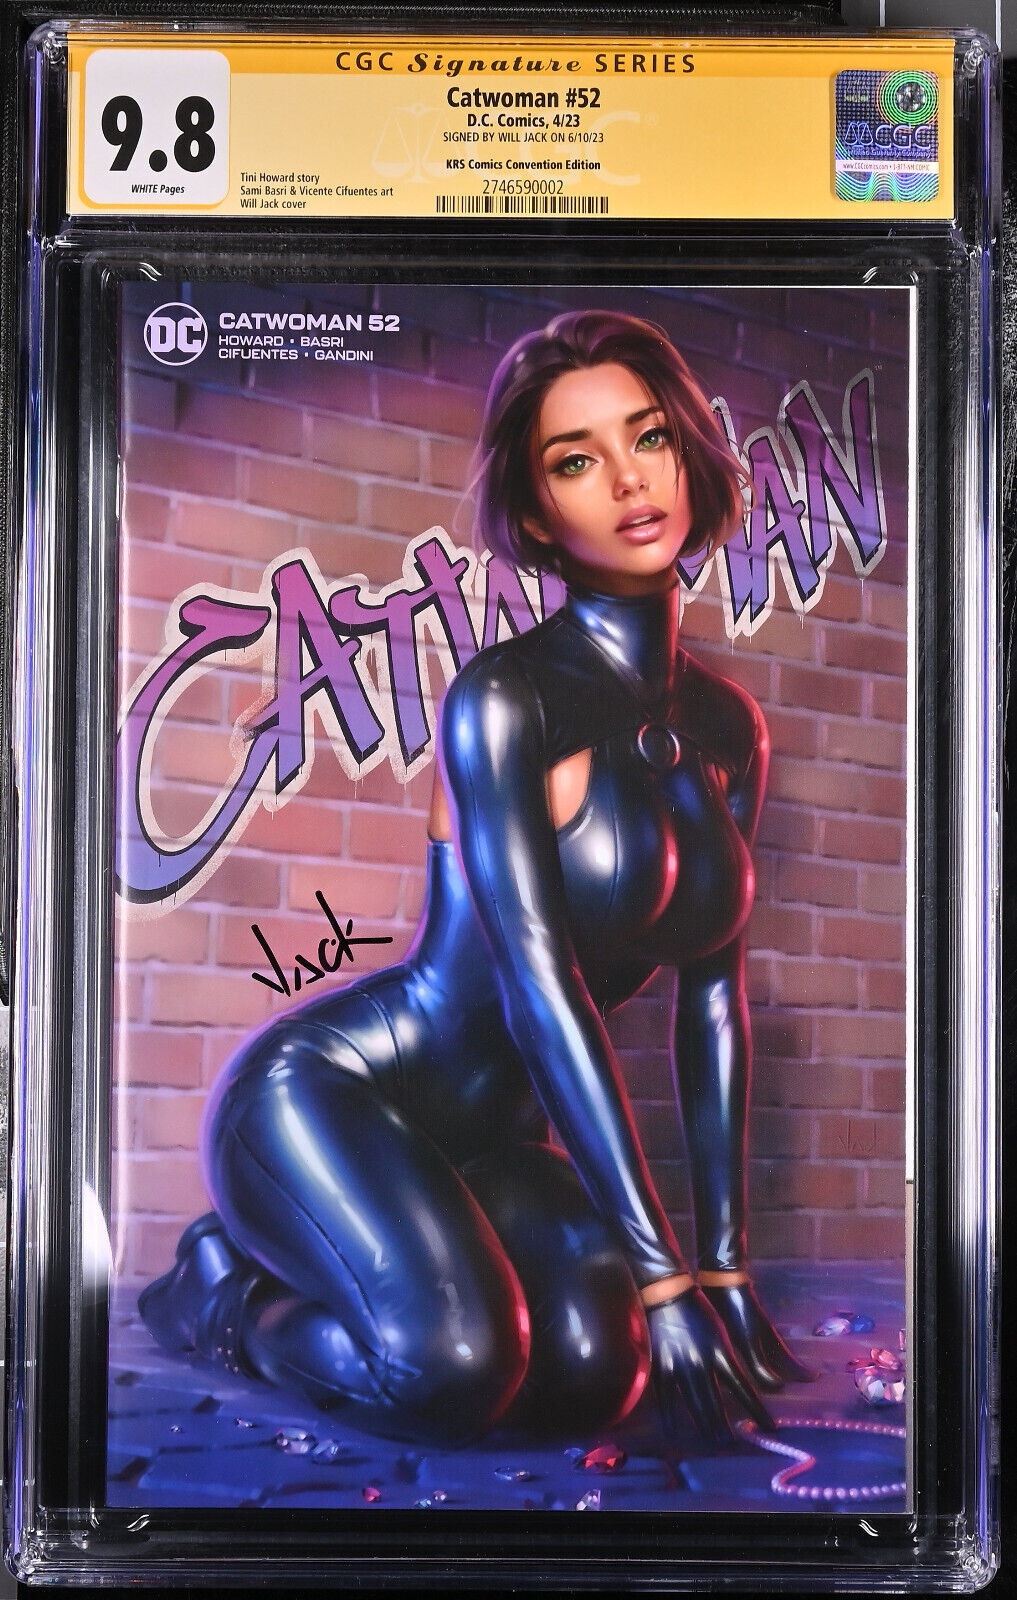 Catwoman #52 Will Jack Limited Trade Convention Variant CGC 9.8 - Signed